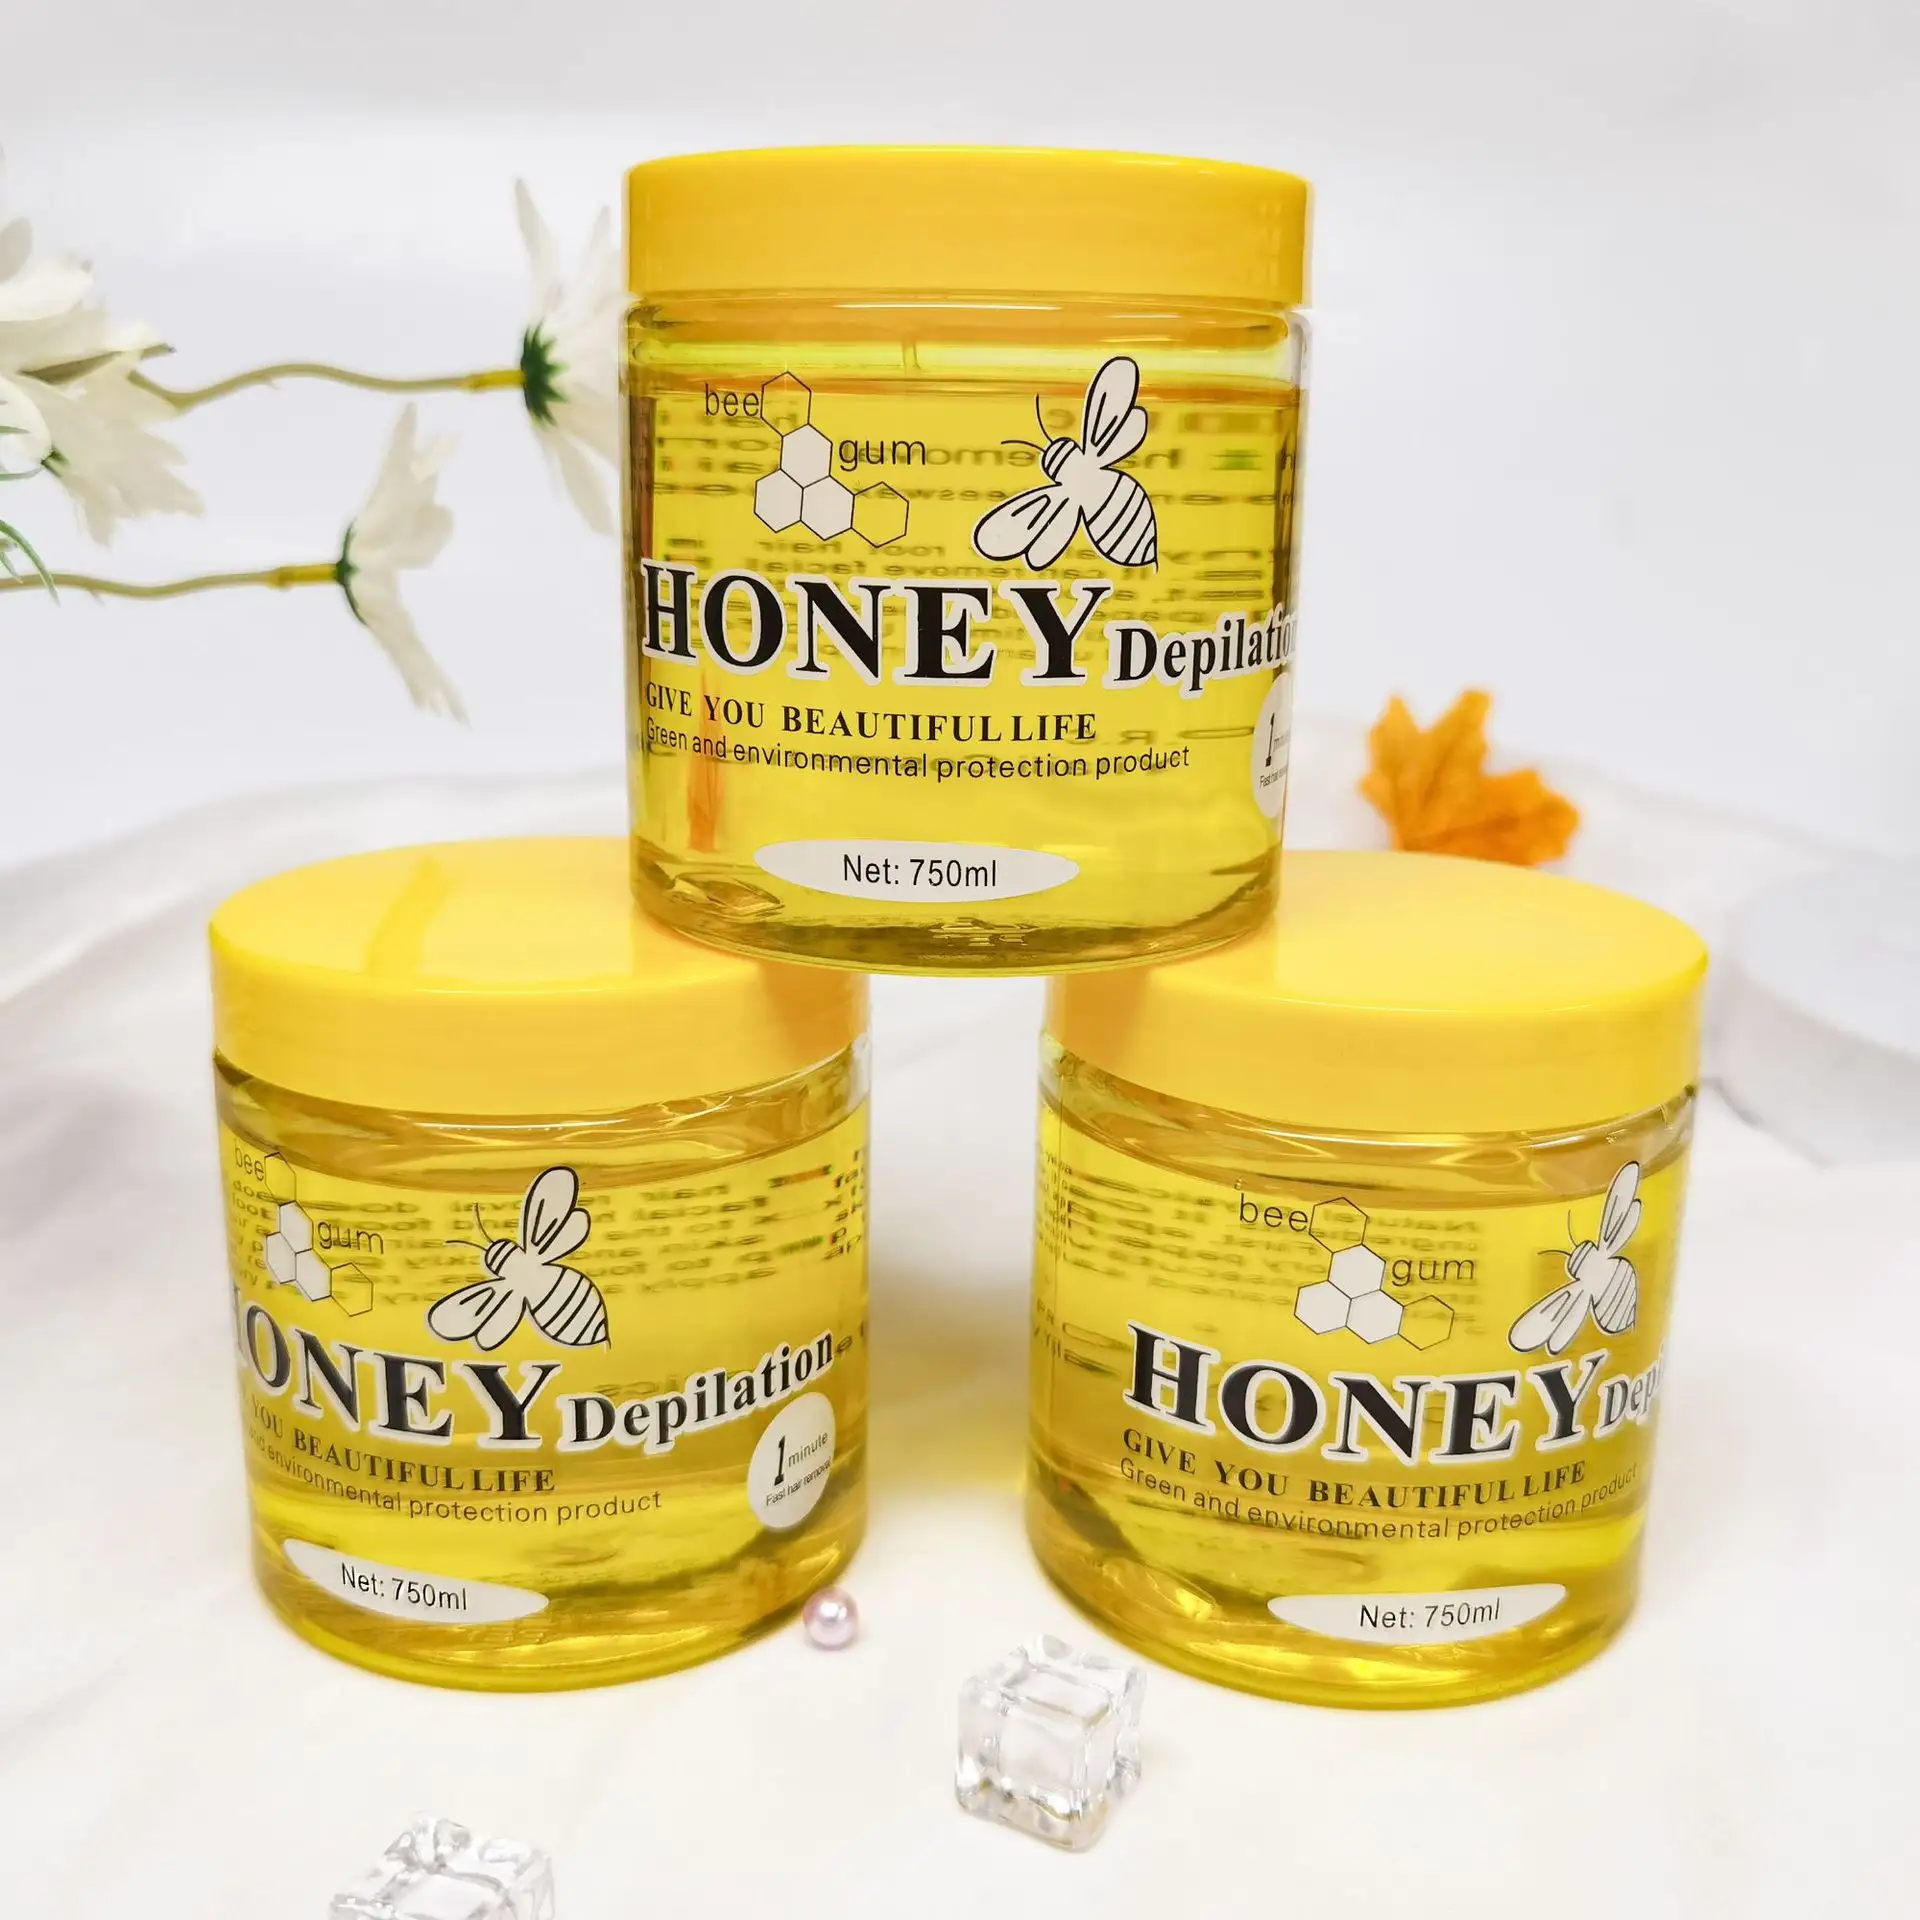 Honey depilatory wax Hair Removal soft Wax for Arm Leg removal Wax Factory professional hair